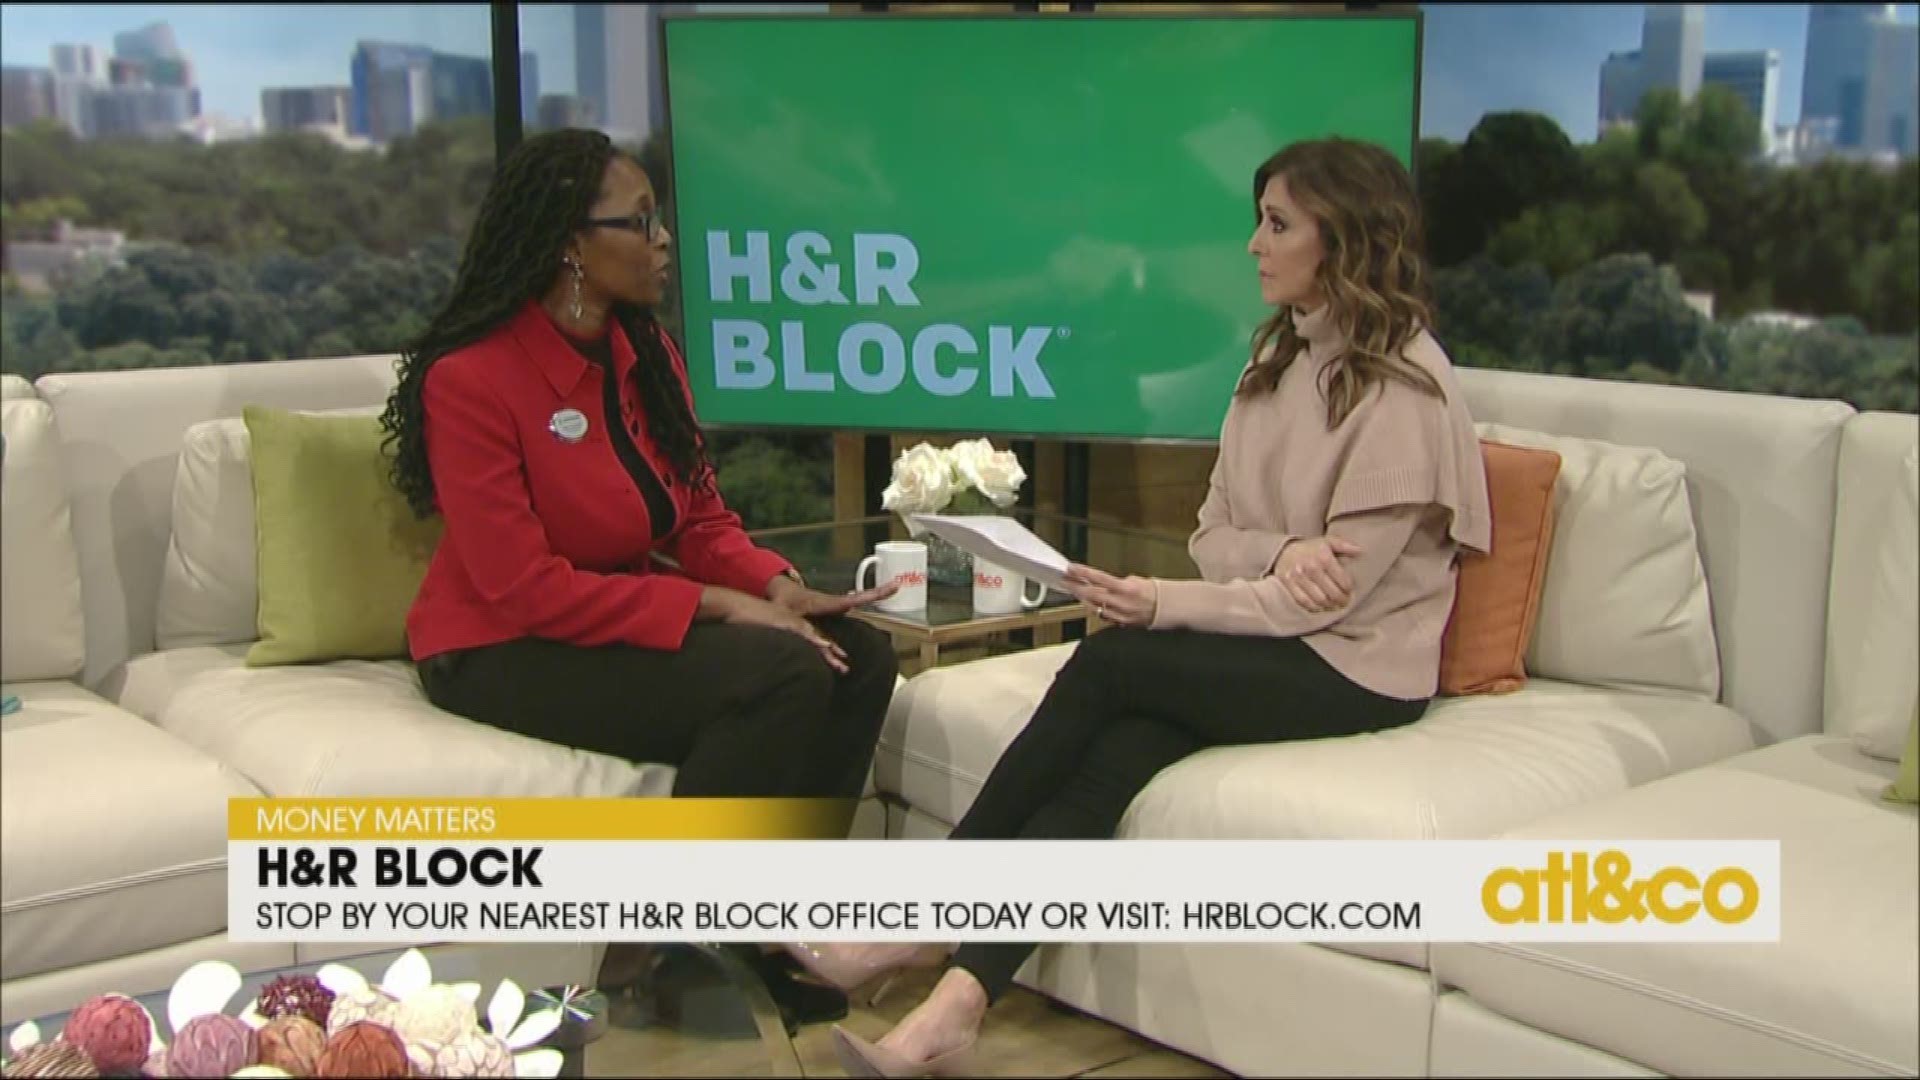 H&R Block shares top tips for this tax season!